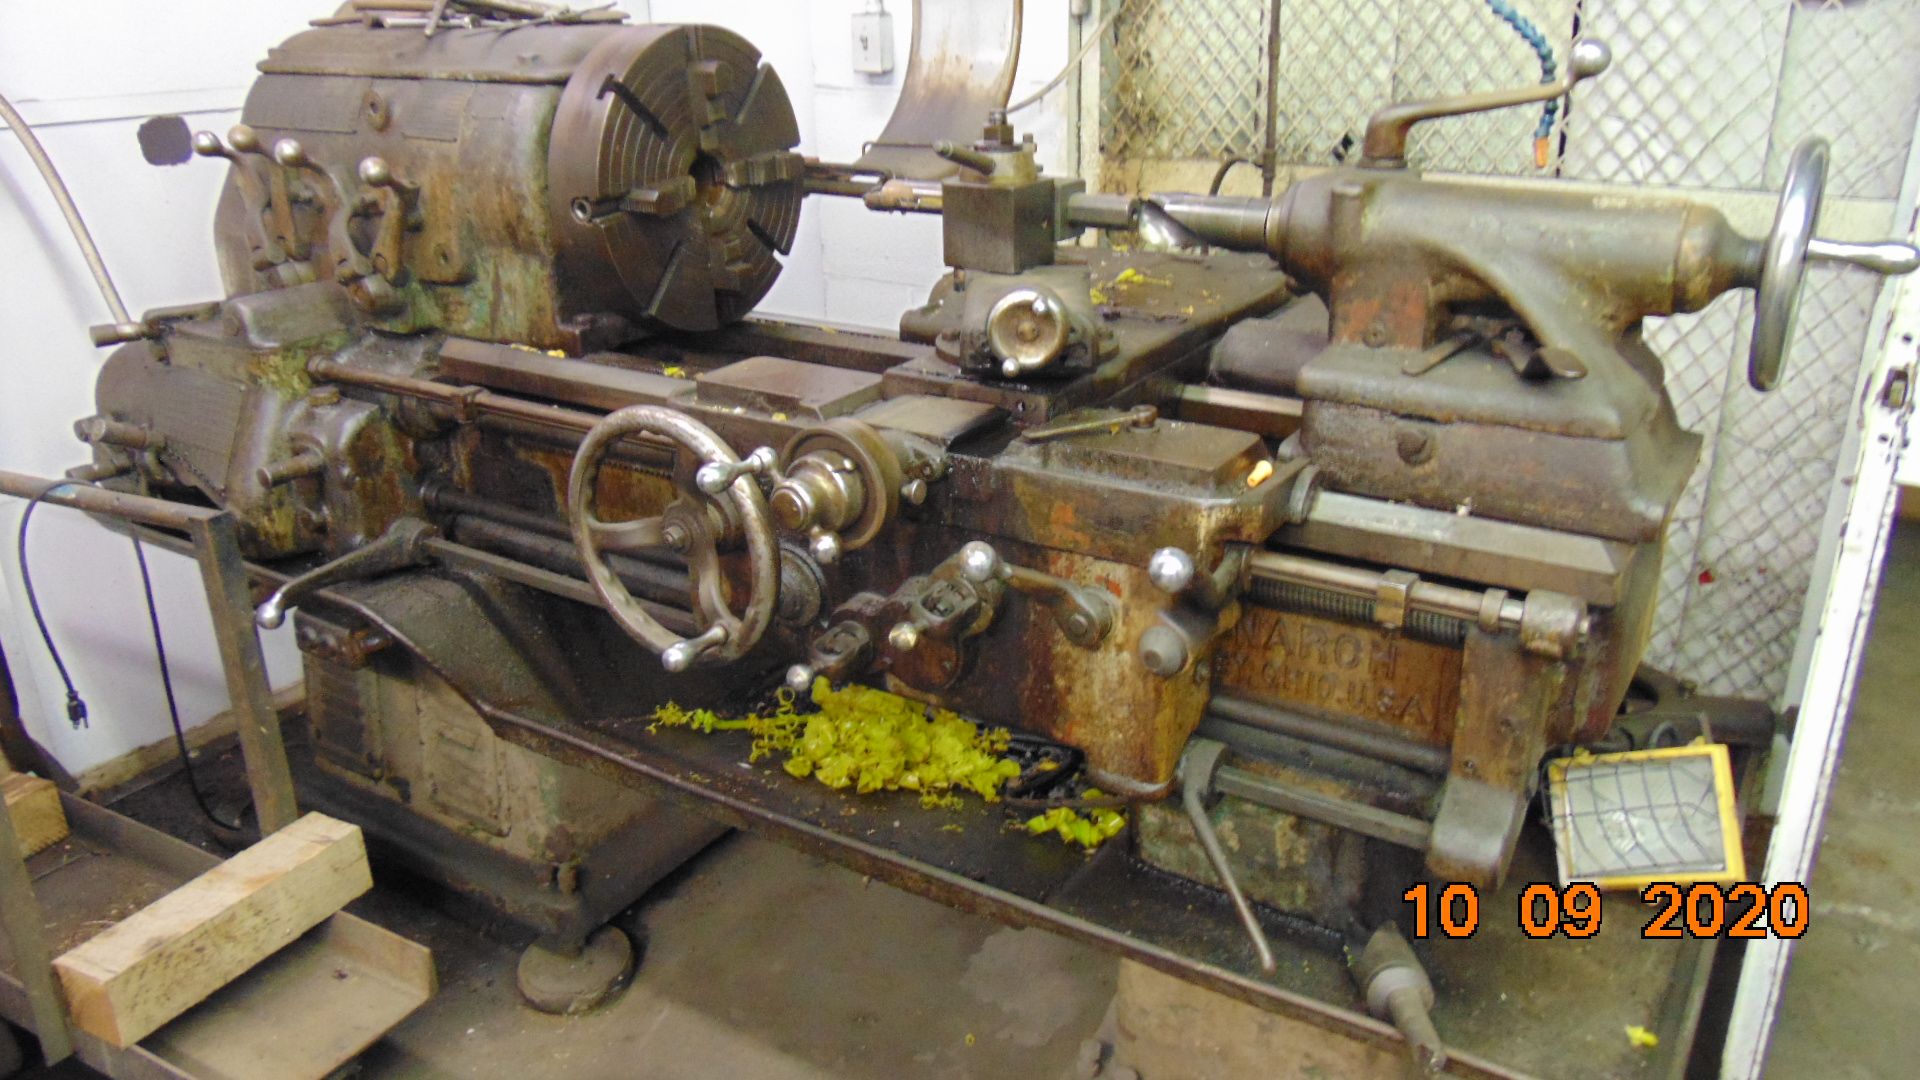 Contents in Smelter Maintenance Shop - Image 35 of 46